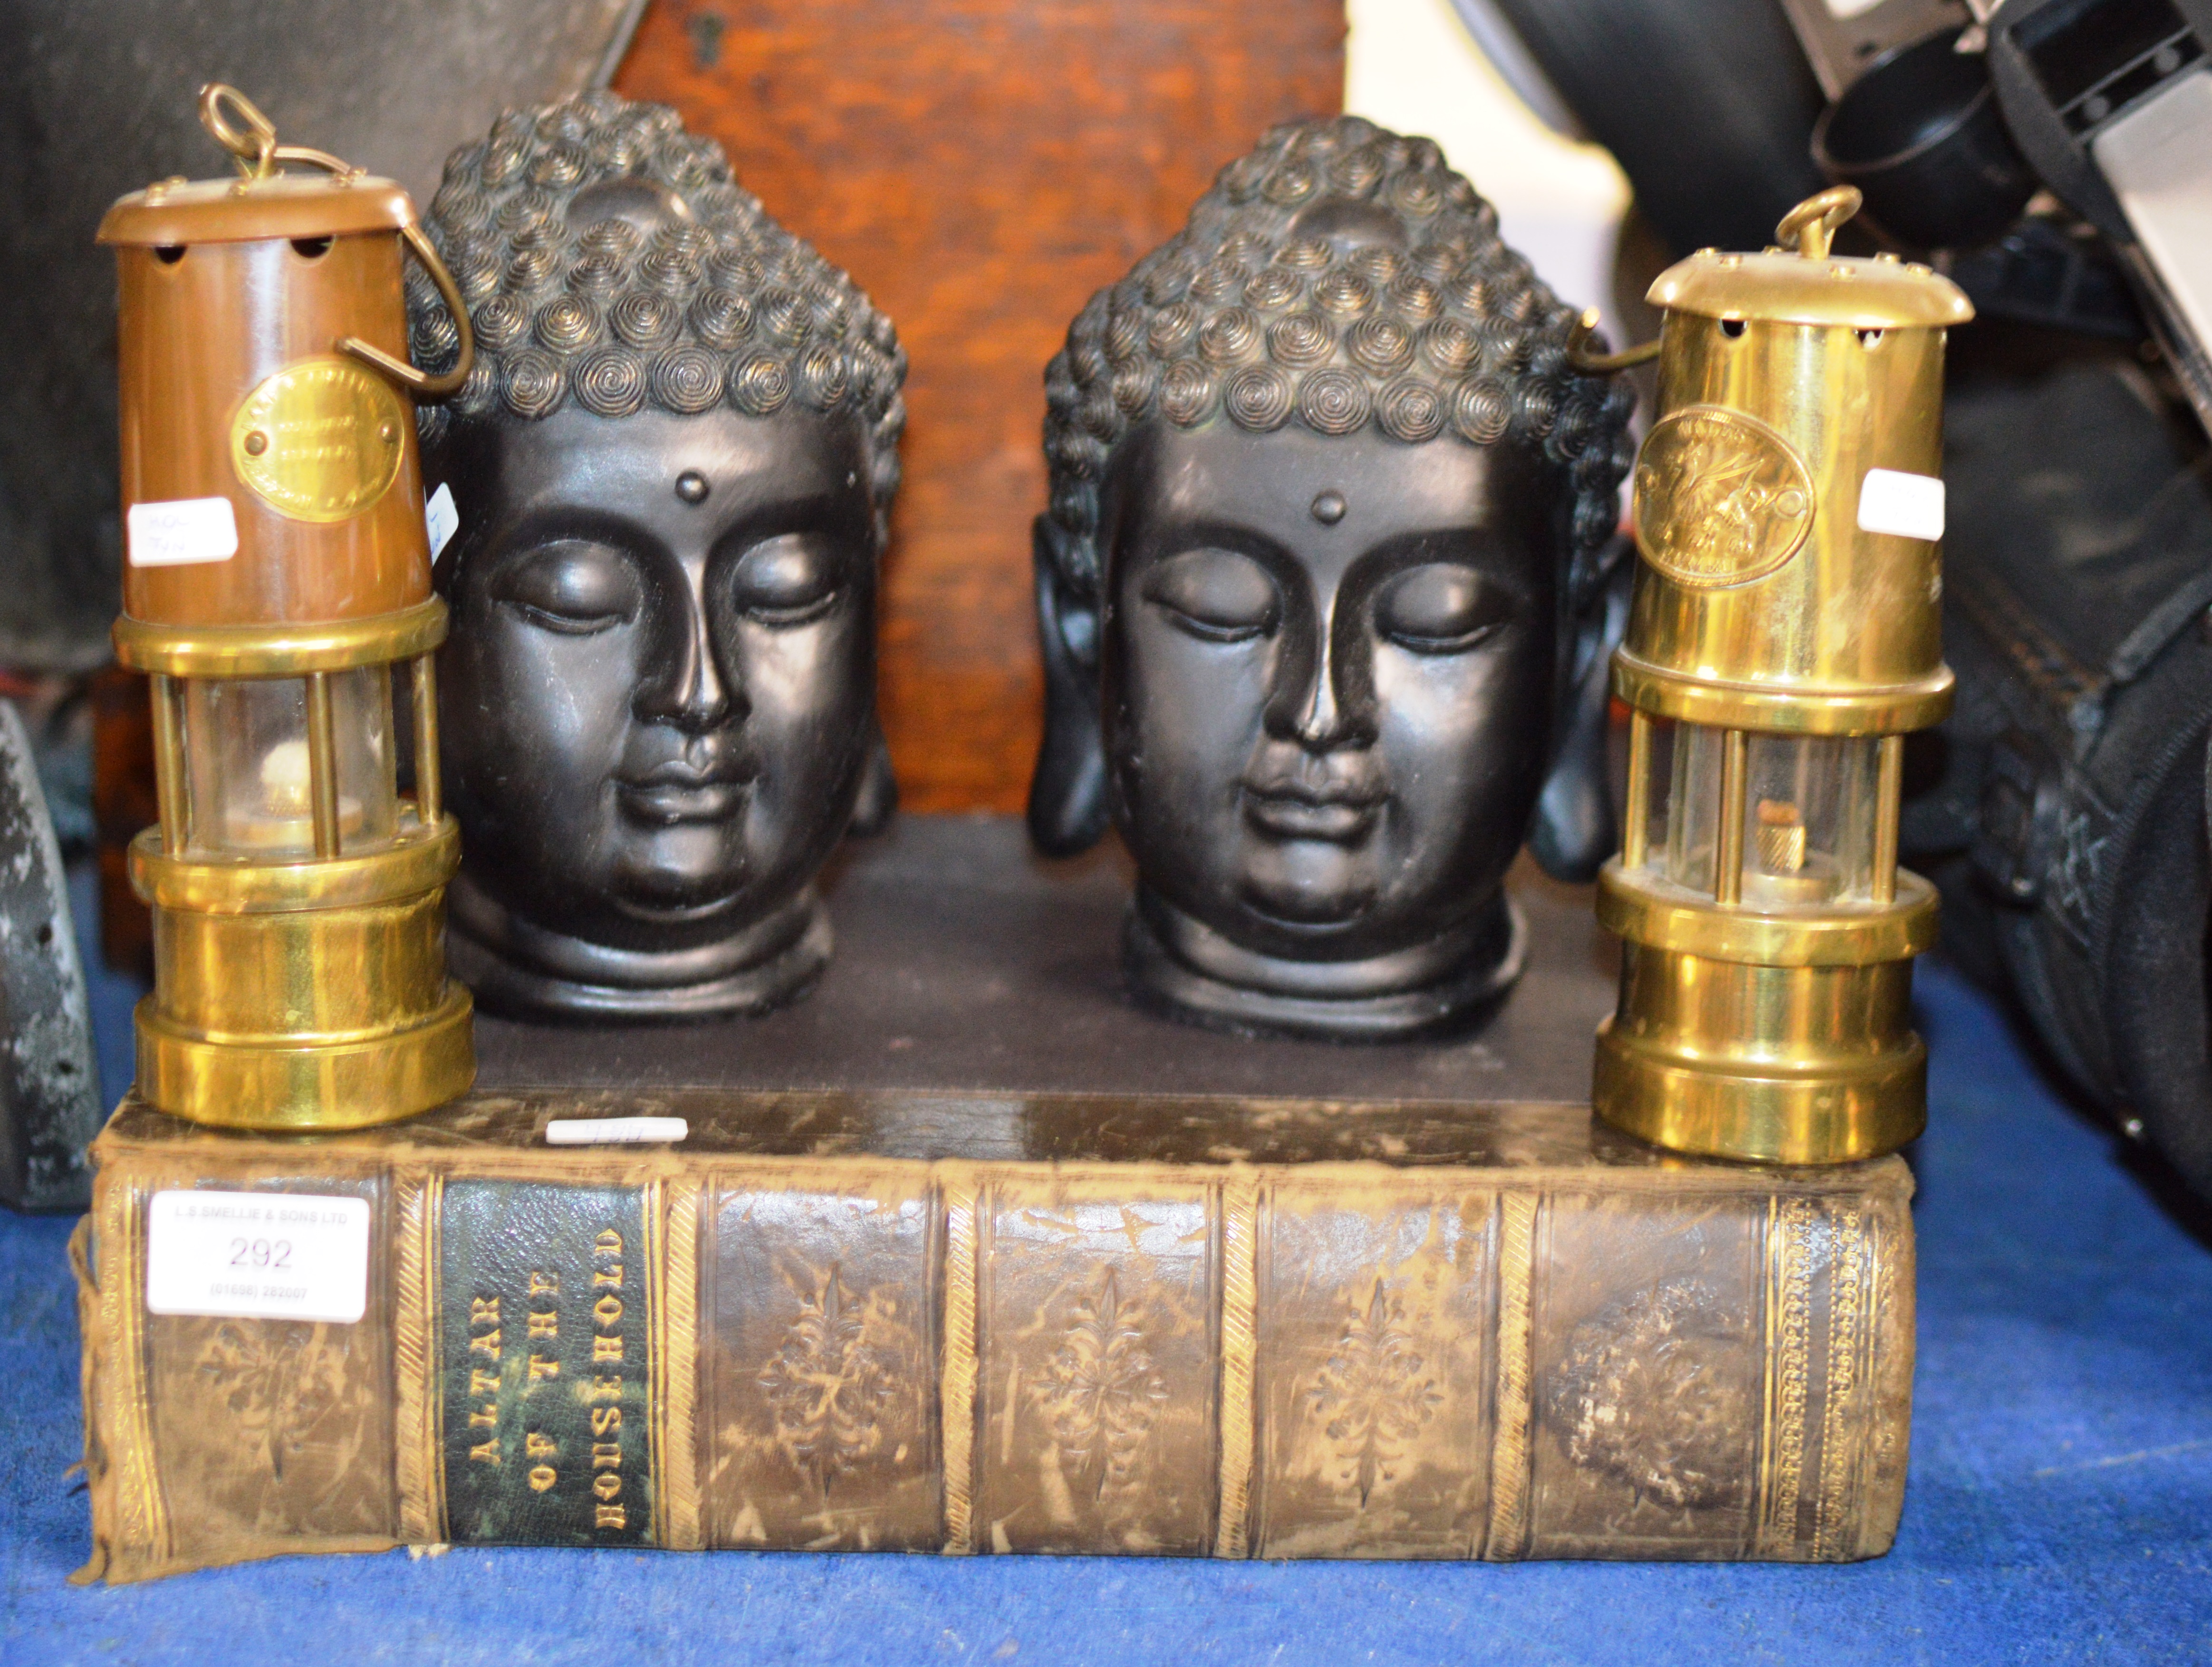 OLD LEATHER BOUND BOOK, PAIR OF BUDDHA ORNAMENTS & 2 SMALL MINOR LAMPS